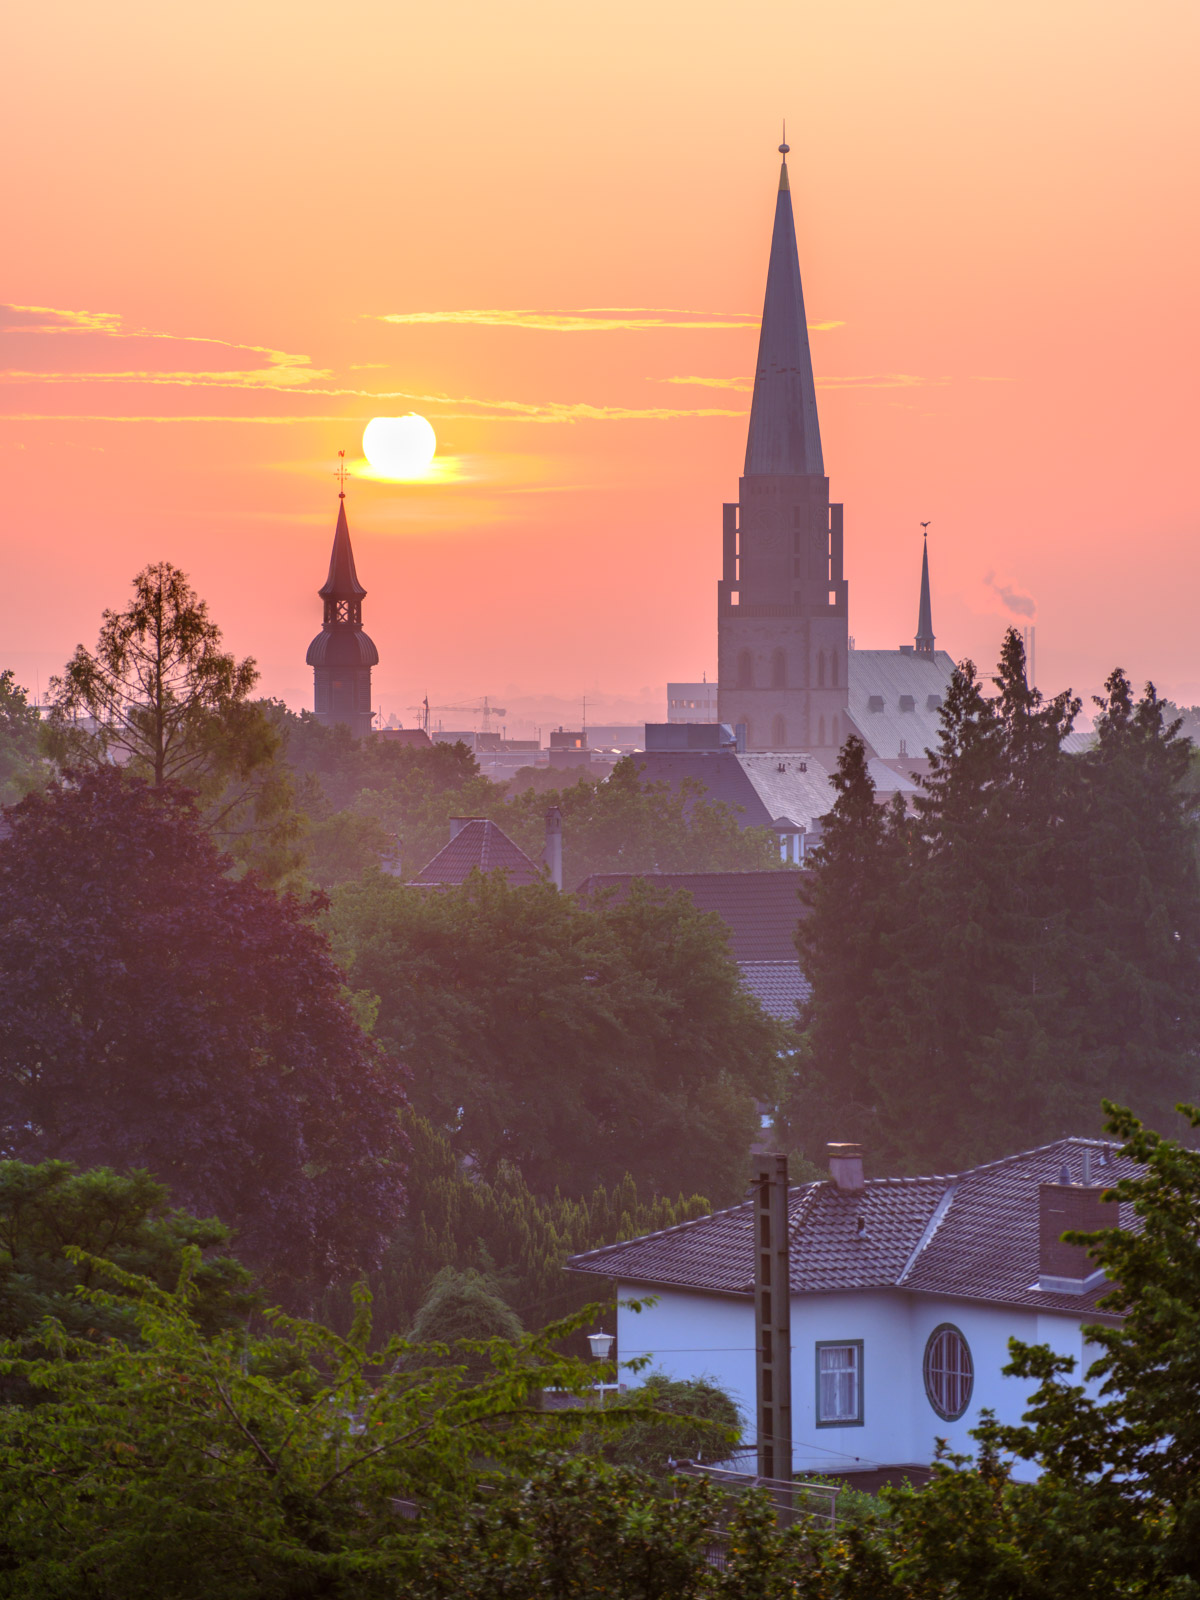 Tower of Nikolai church and Bielefeld city center at sunrise in July 2021 (Bielefeld, Germany).